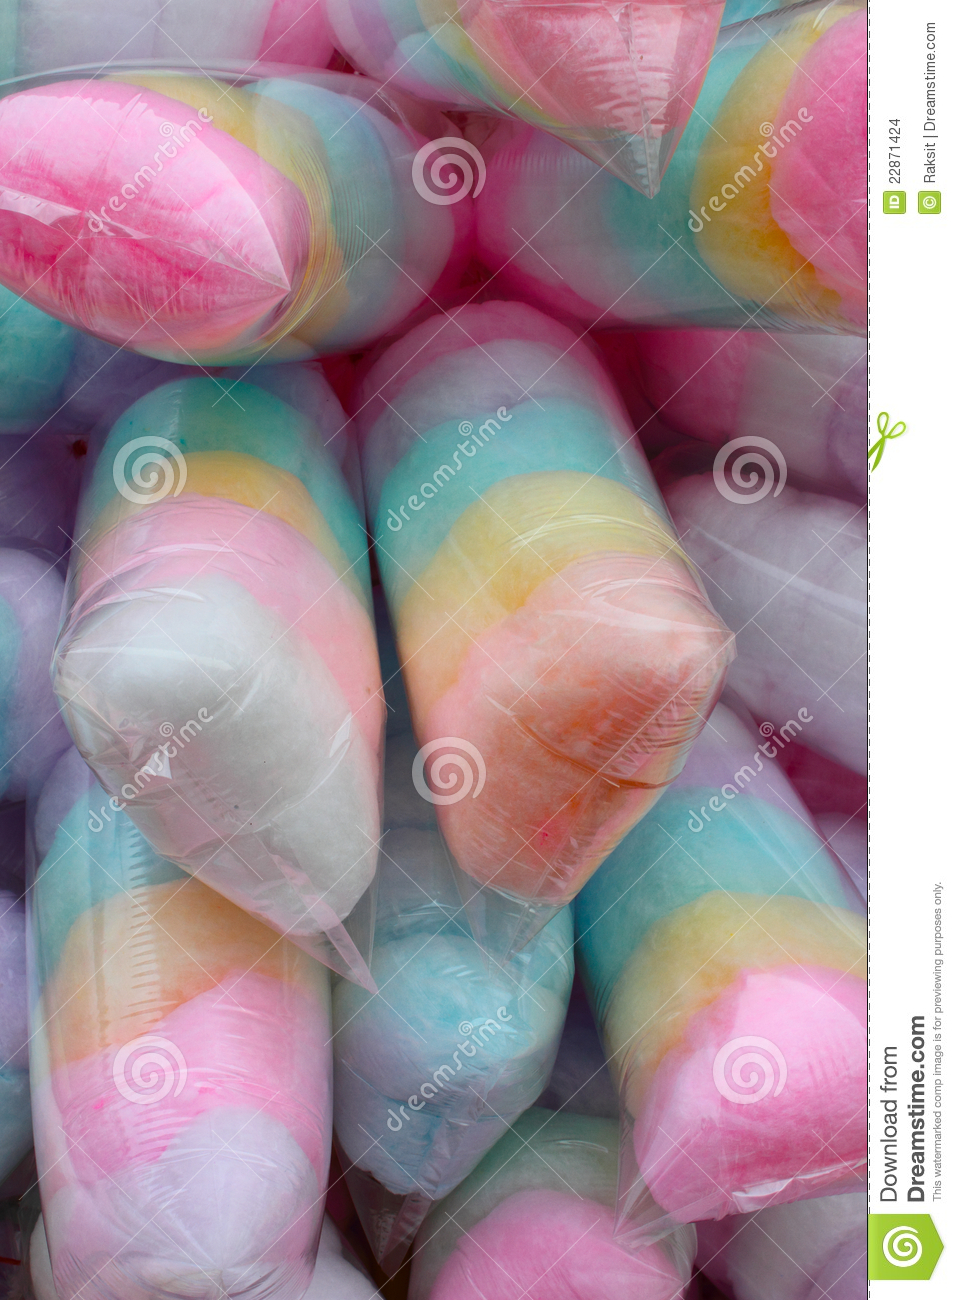 Cotton Candy Stock Images   Image  22871424